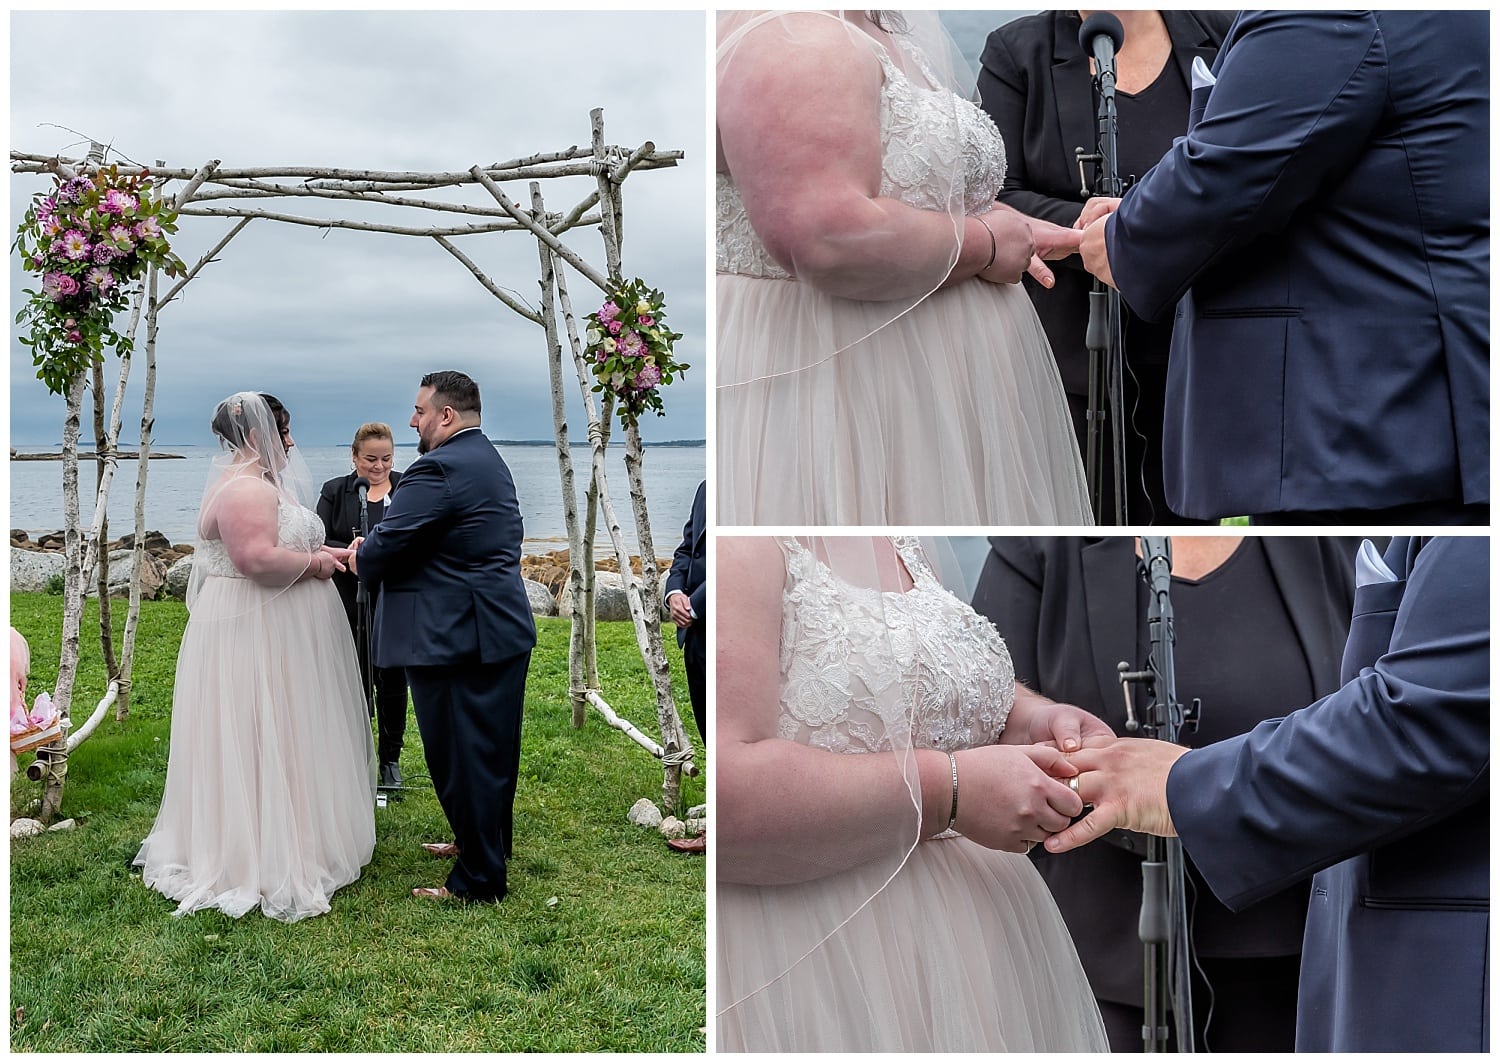 The bride and groom exchange their wedding rings during their wedding ceremony at the Oceanstone Resort in NS.